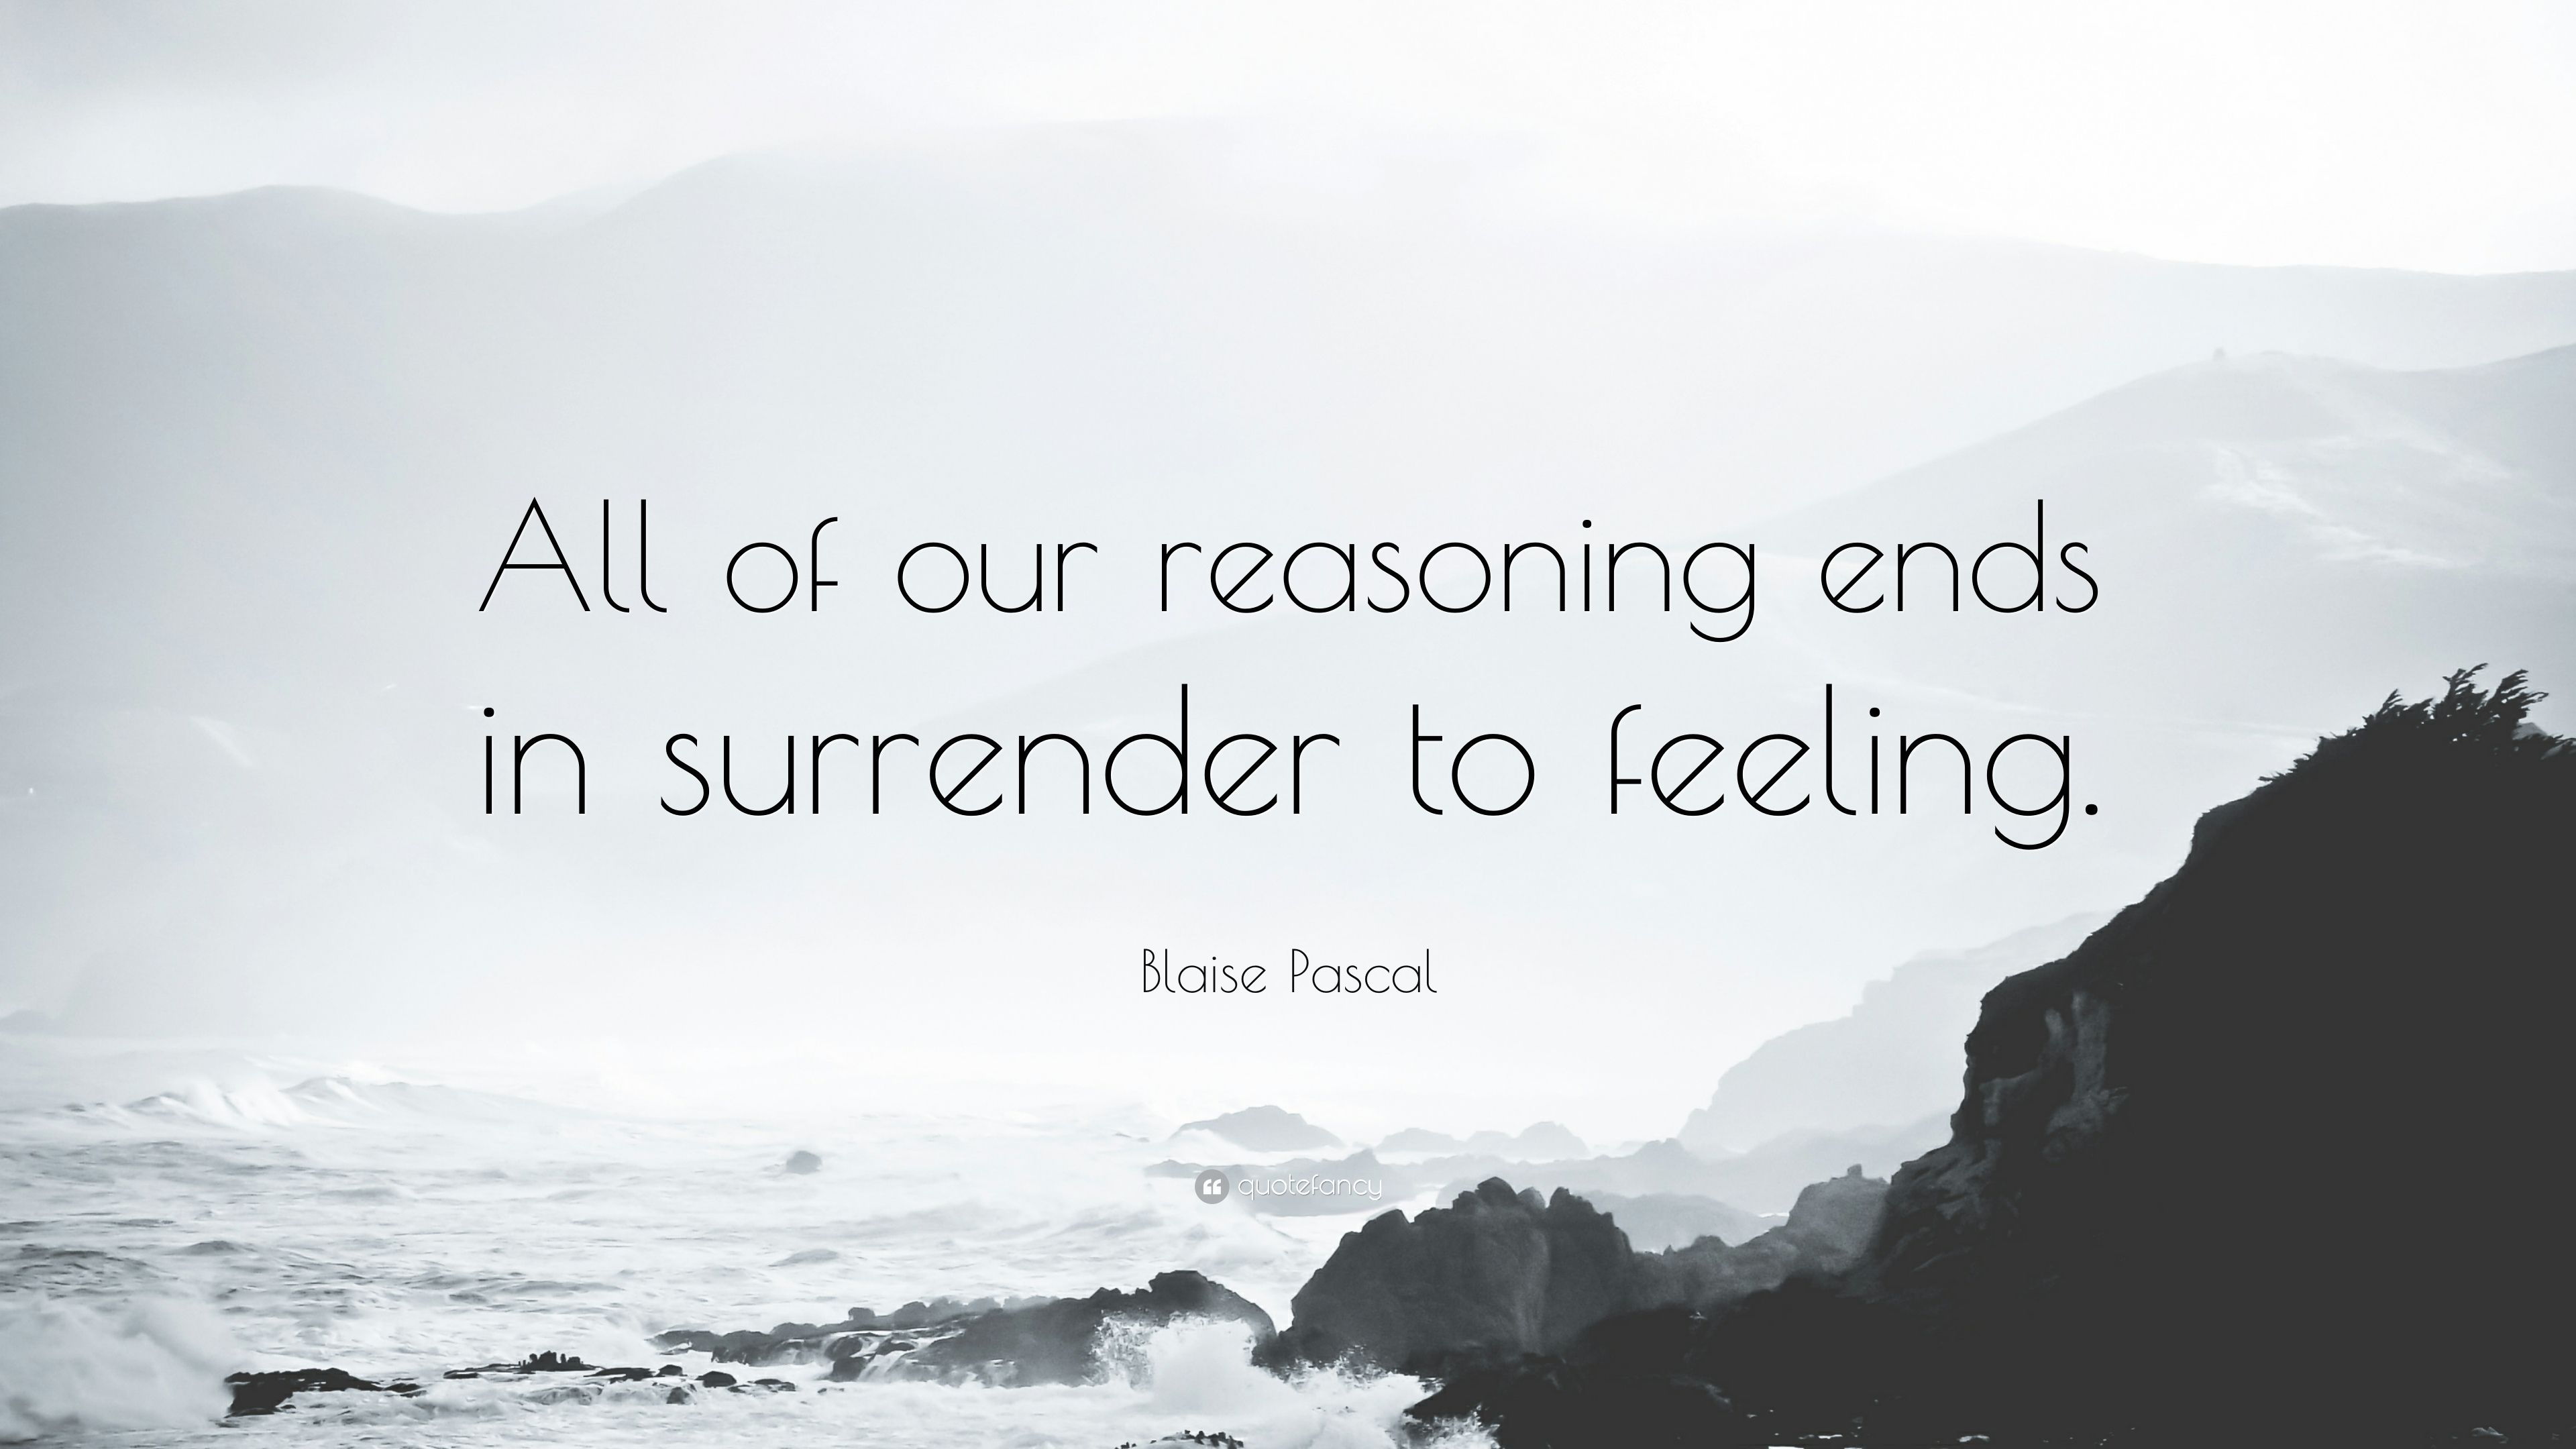 Blaise Pascal Quote: “All of our reasoning ends in surrender to feeling.” (9 wallpaper)